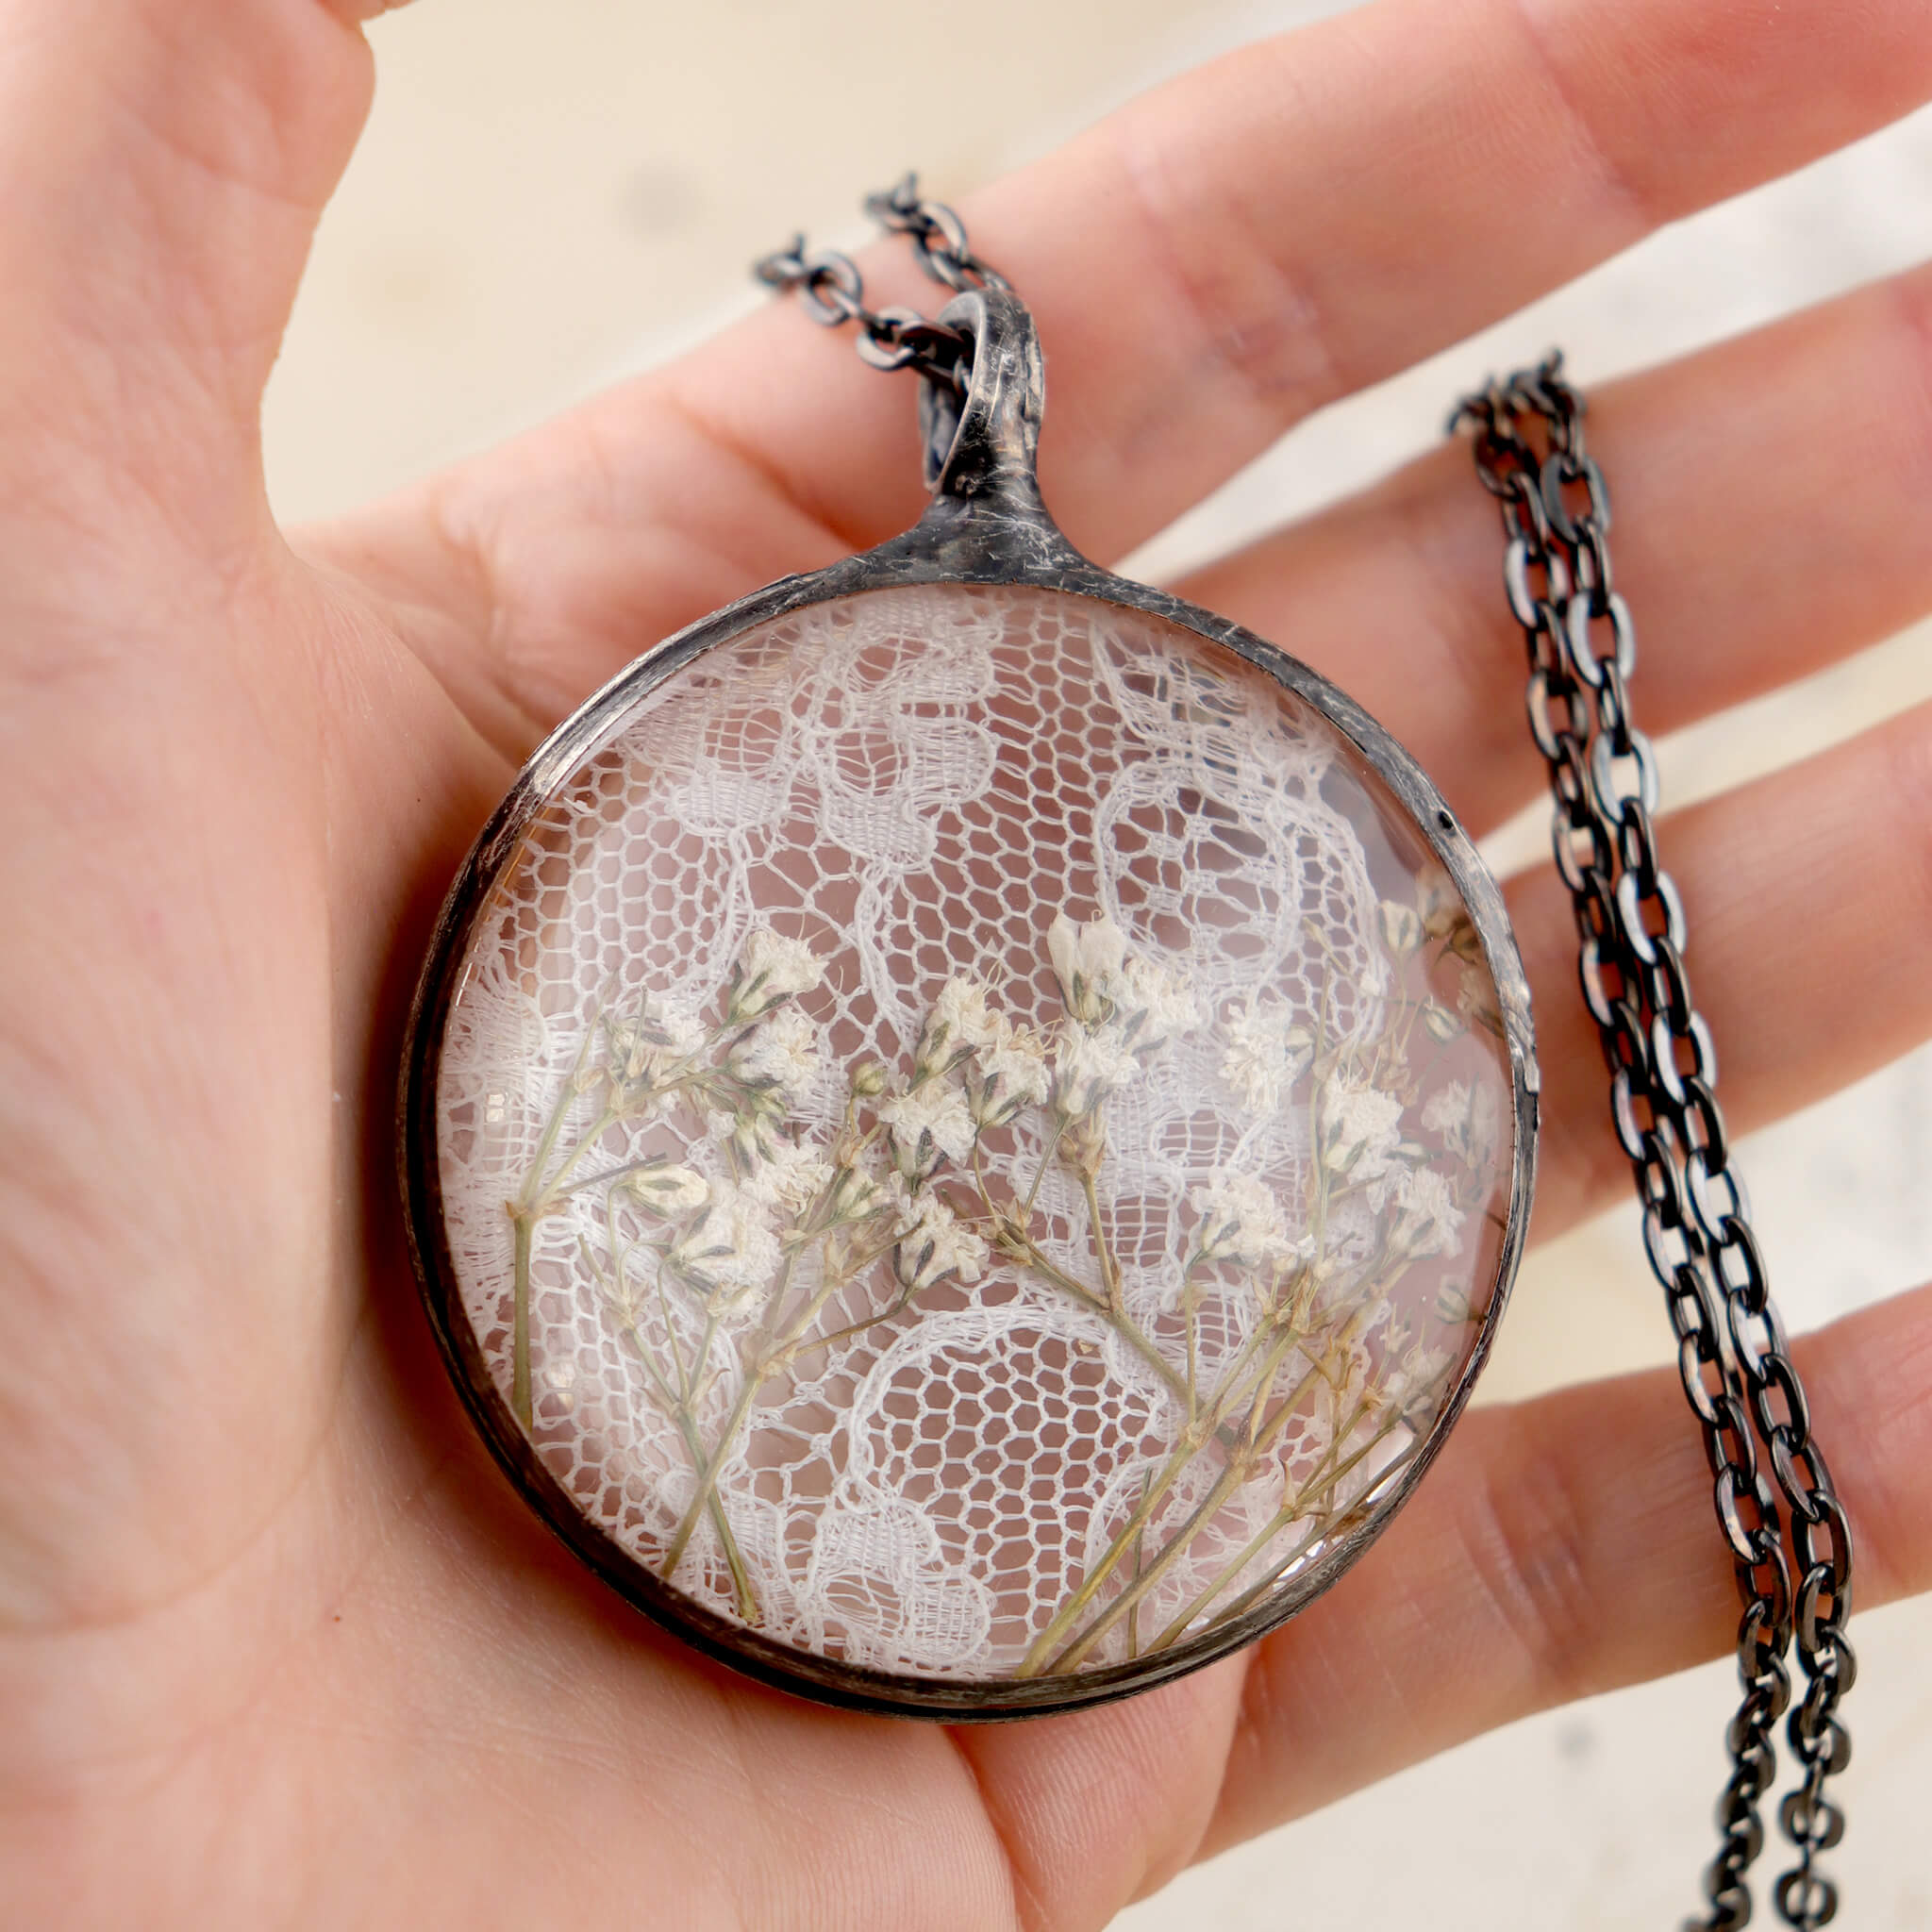 Hand holding glass necklace with gypsophila flowers 